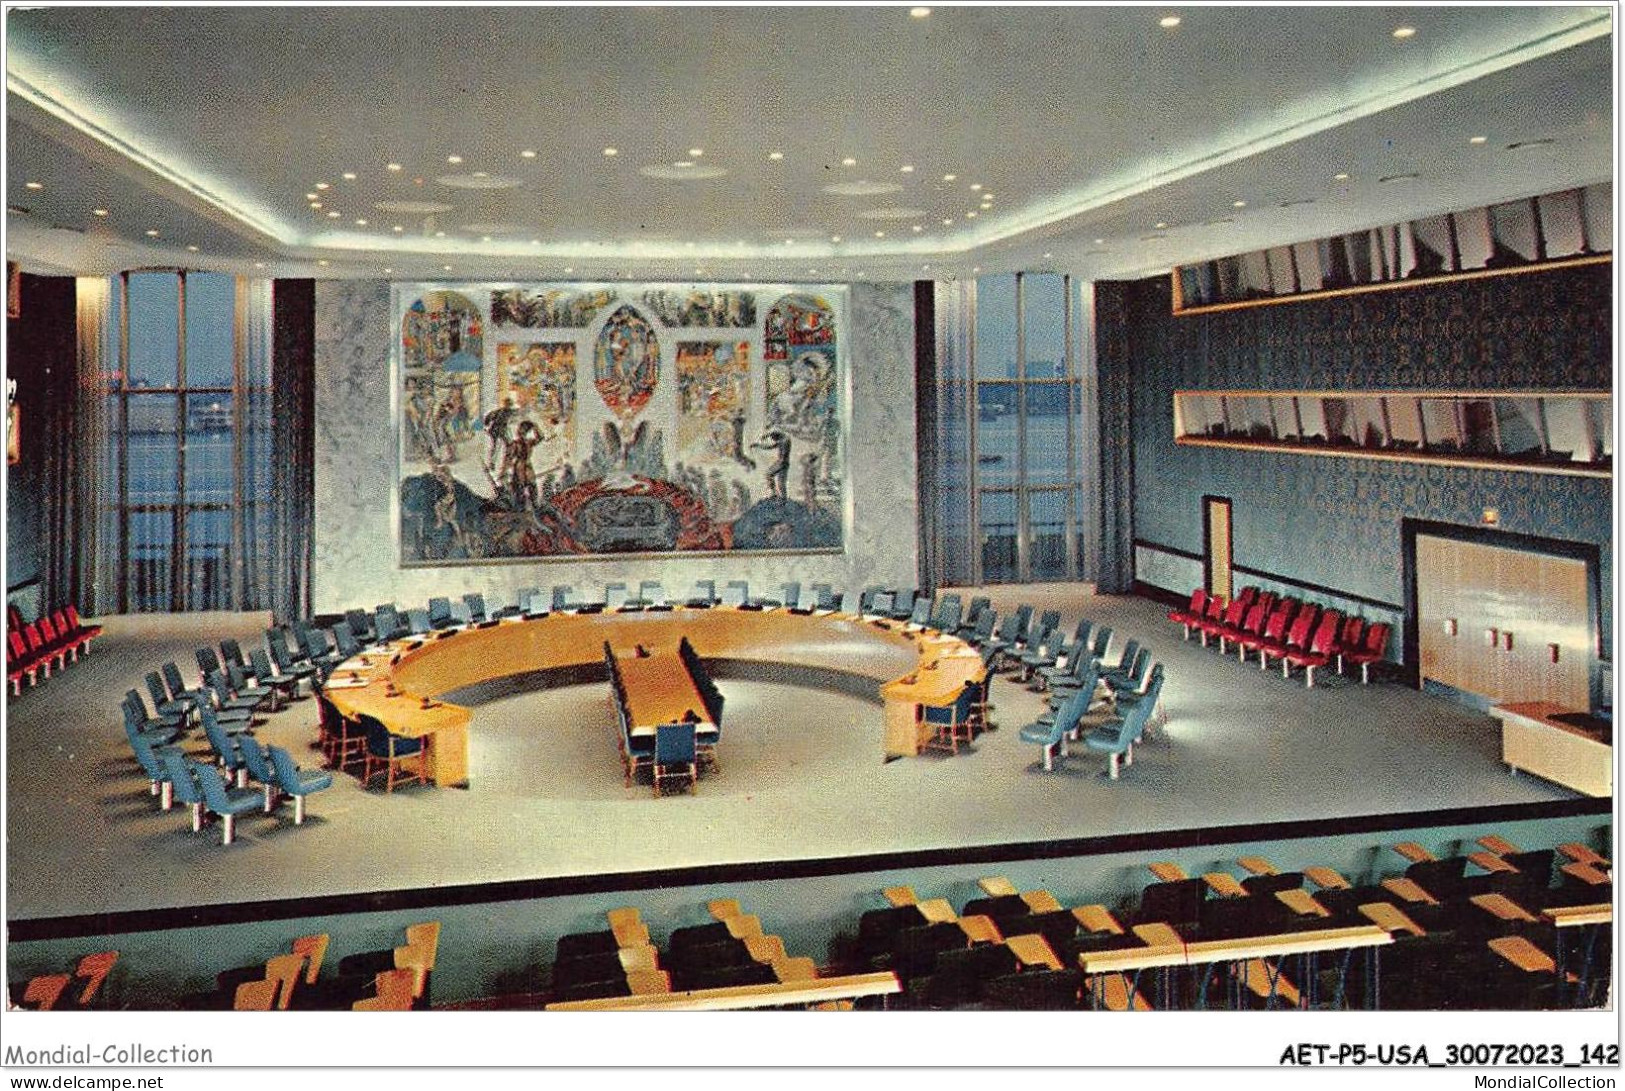 AETP5-USA-0420 - NEW YORK - Security Council Chamber - Andere Monumente & Gebäude